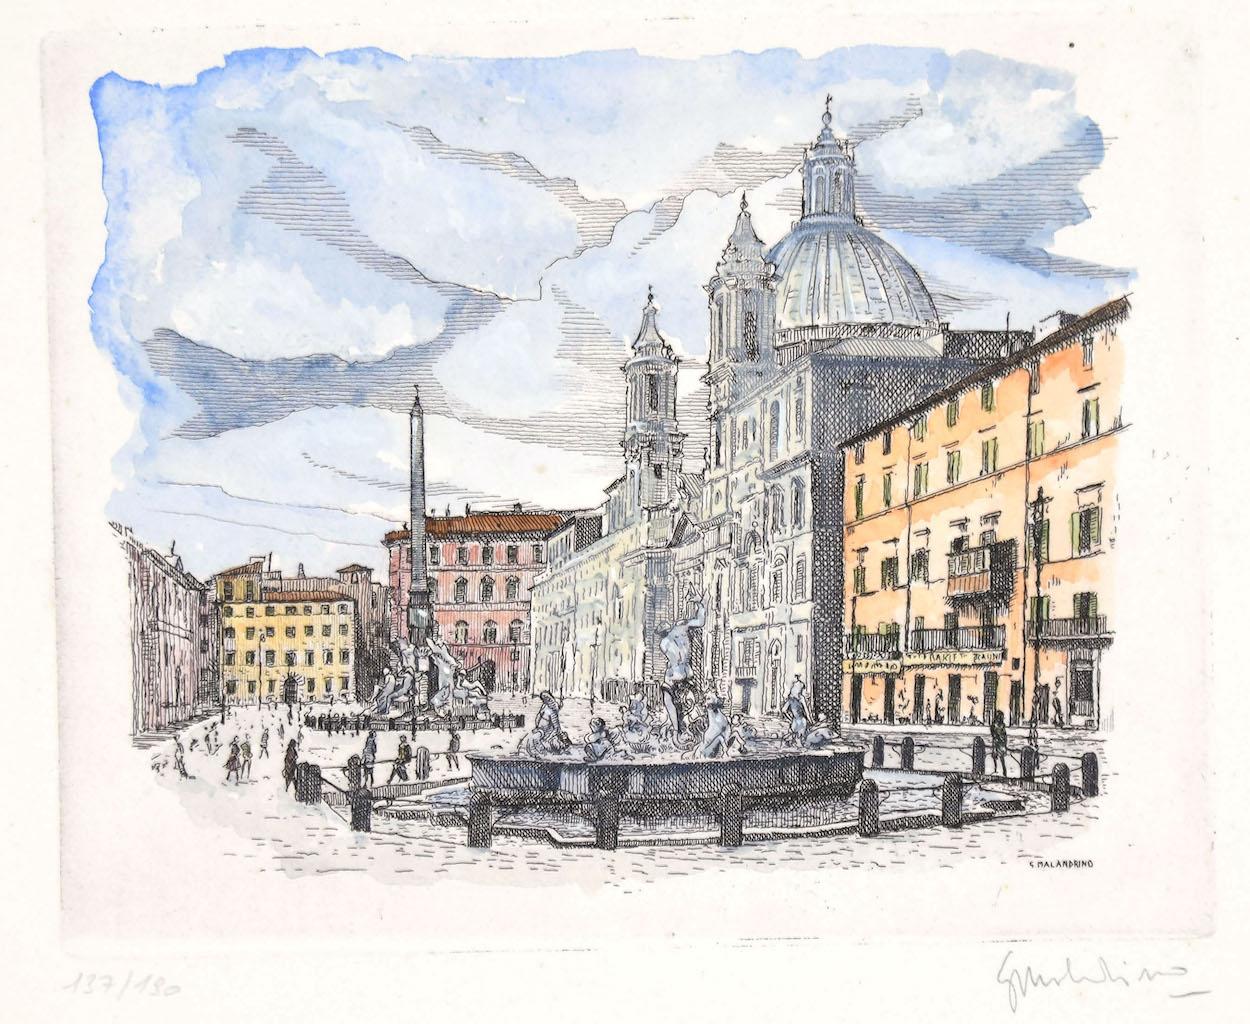 Navona Square - Rome is an original artwork realized by Giuseppe Malandrino.

Original print in etching technique.

Hand-signed by the artist in pencil on the lower right corner.numbered, editing 101/199.

Good conditions. 

This artwork represents